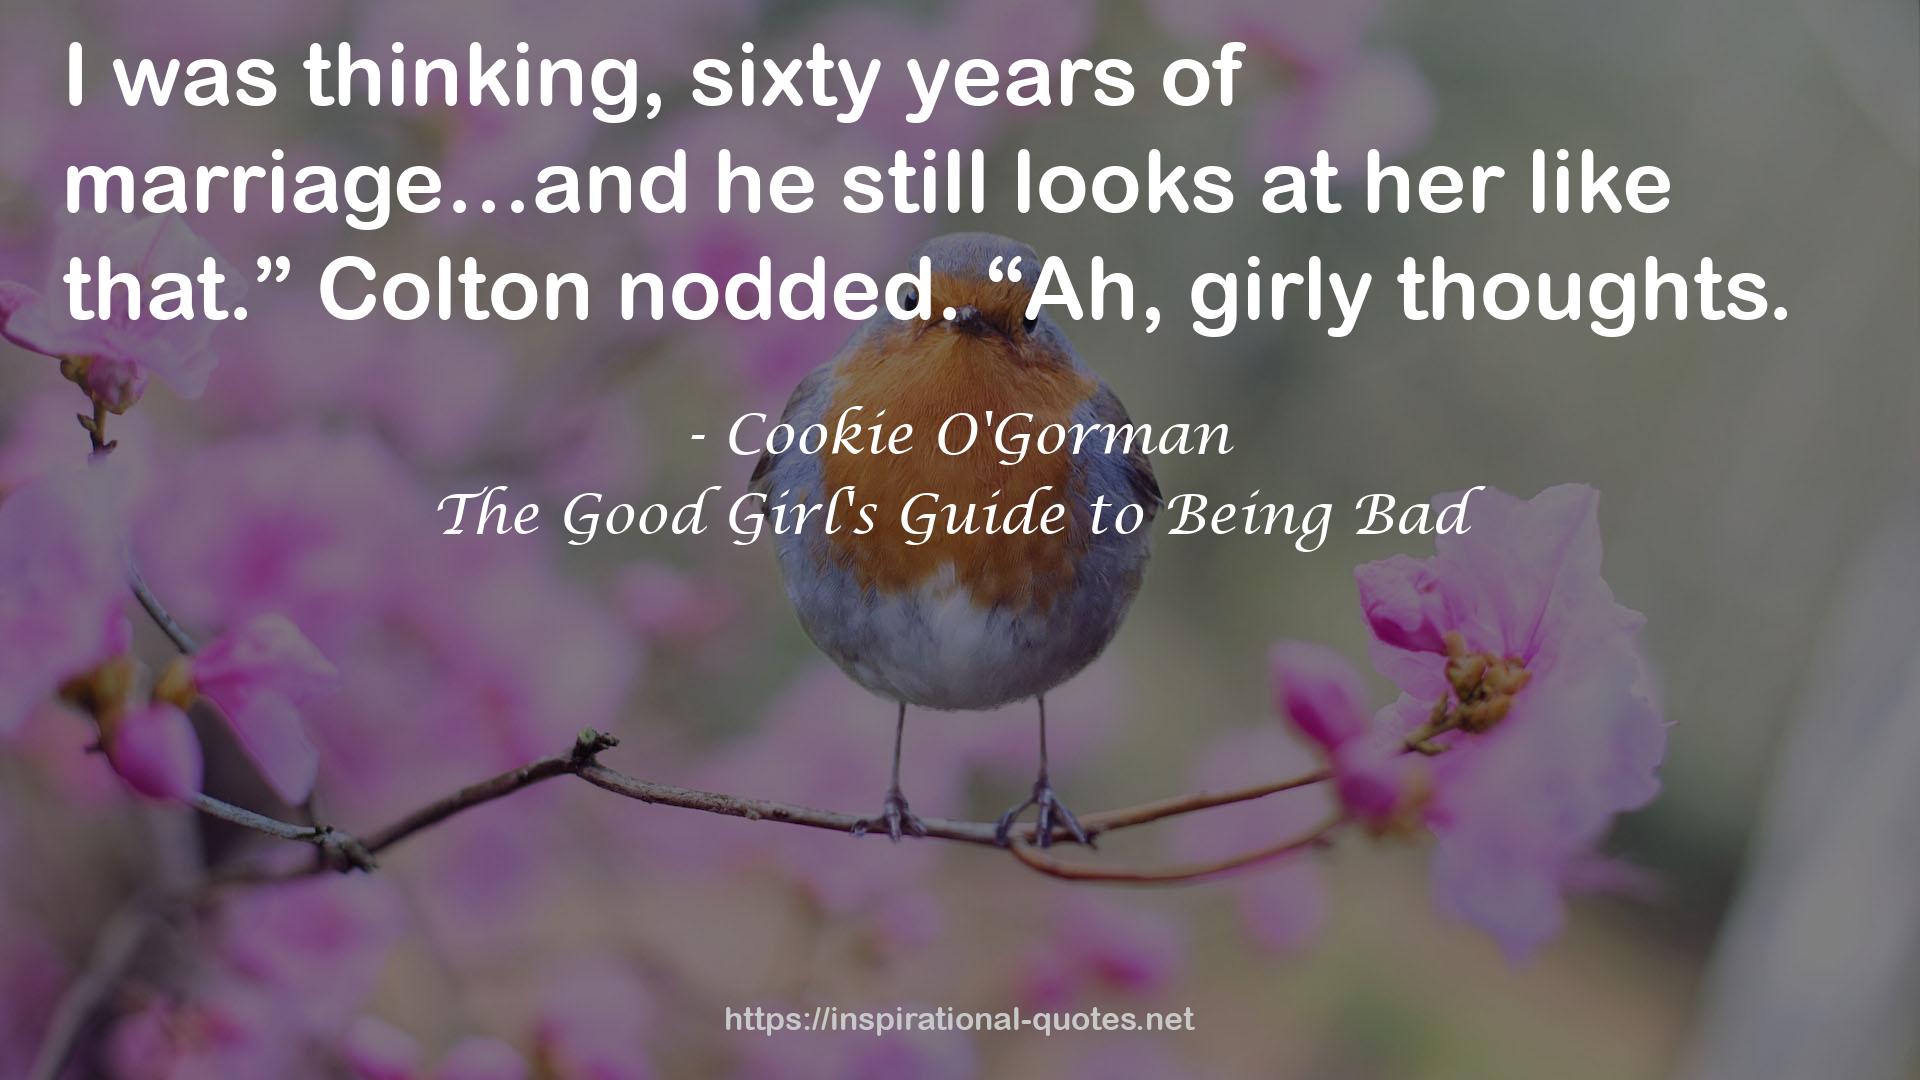 The Good Girl's Guide to Being Bad QUOTES